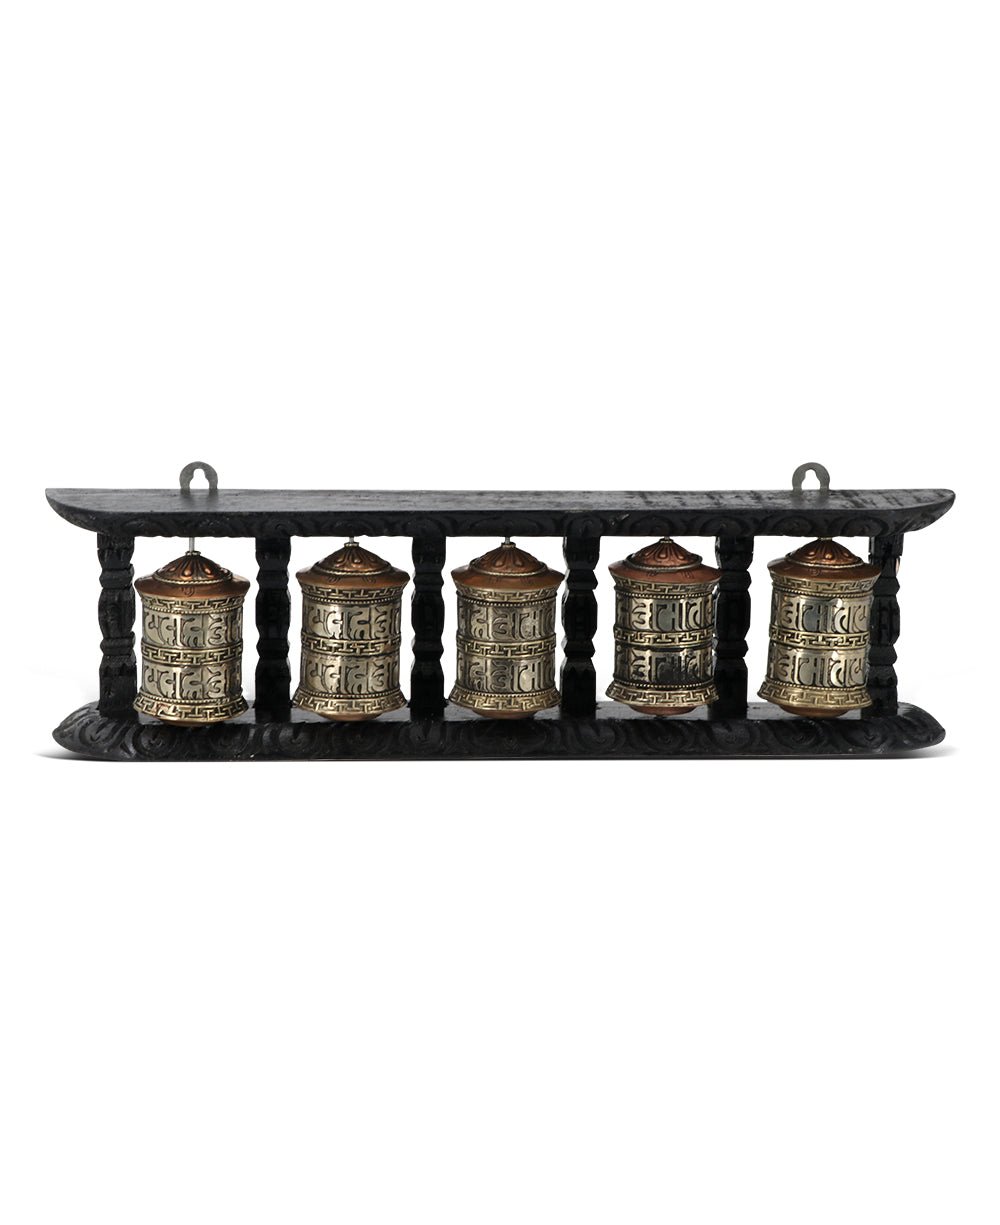 Five-in-One Hanging Metal and Wood Prayer Wheel - Religious Altars